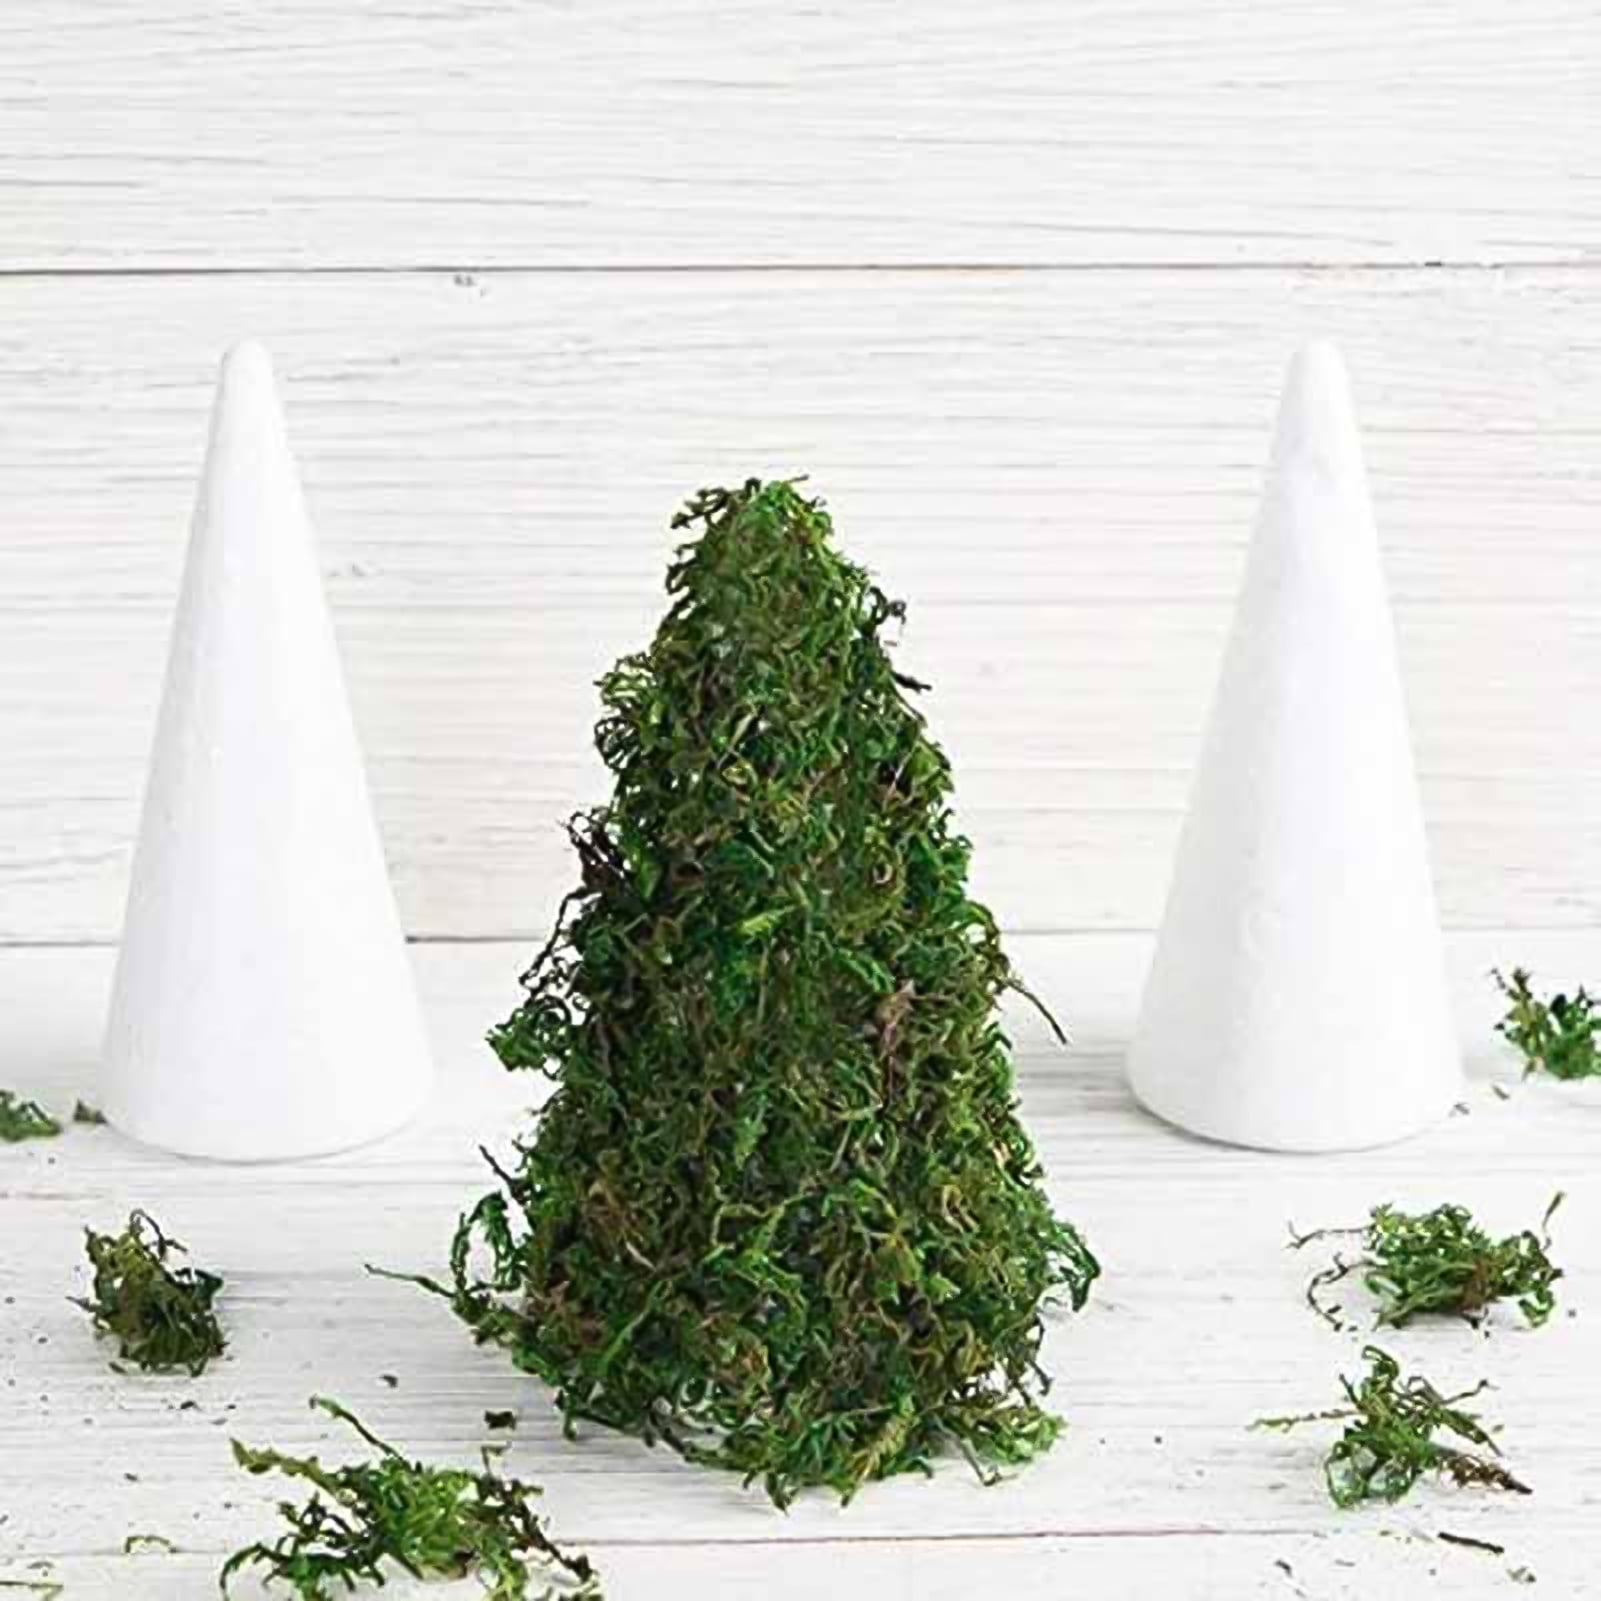 Crafters Choice Foam Cone Set 12 Pack DIY Christmas Tree, Floral  Centerpieces And Table Projects From Maozidl, $9.13